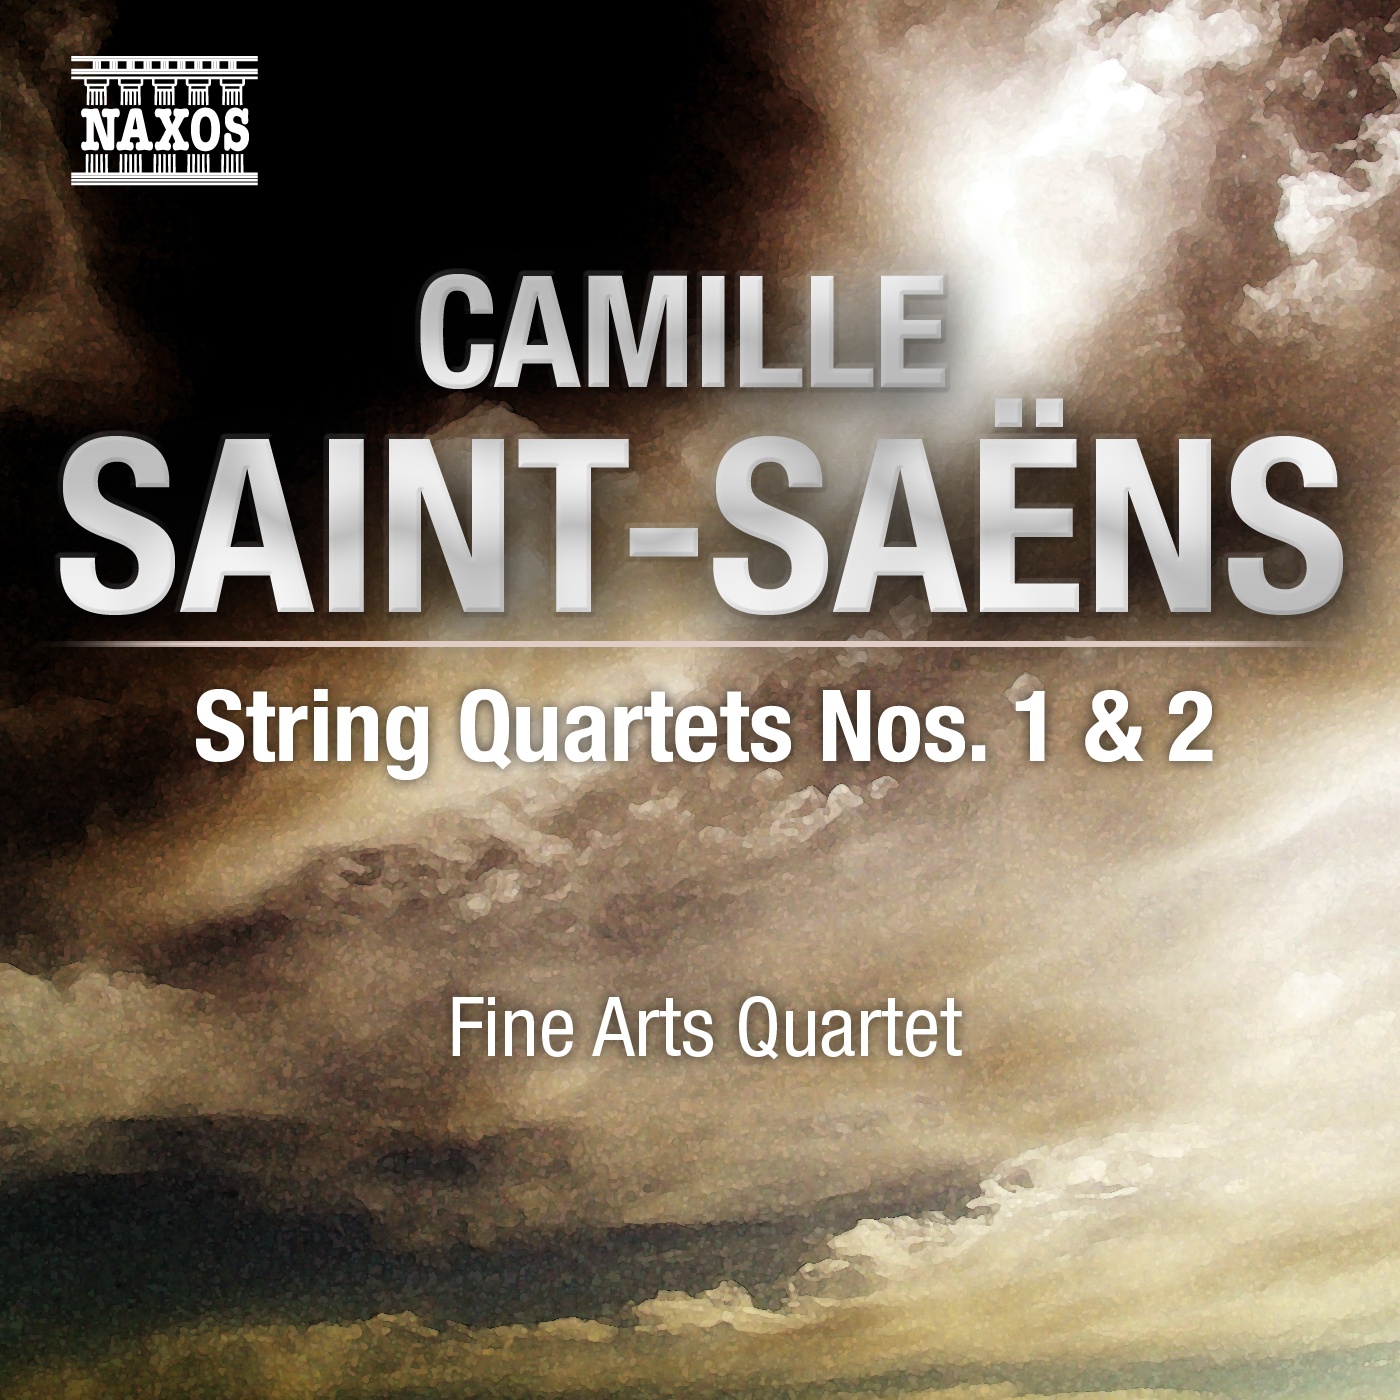 Camille Saint-Saëns: A Celebration Of The French Composer